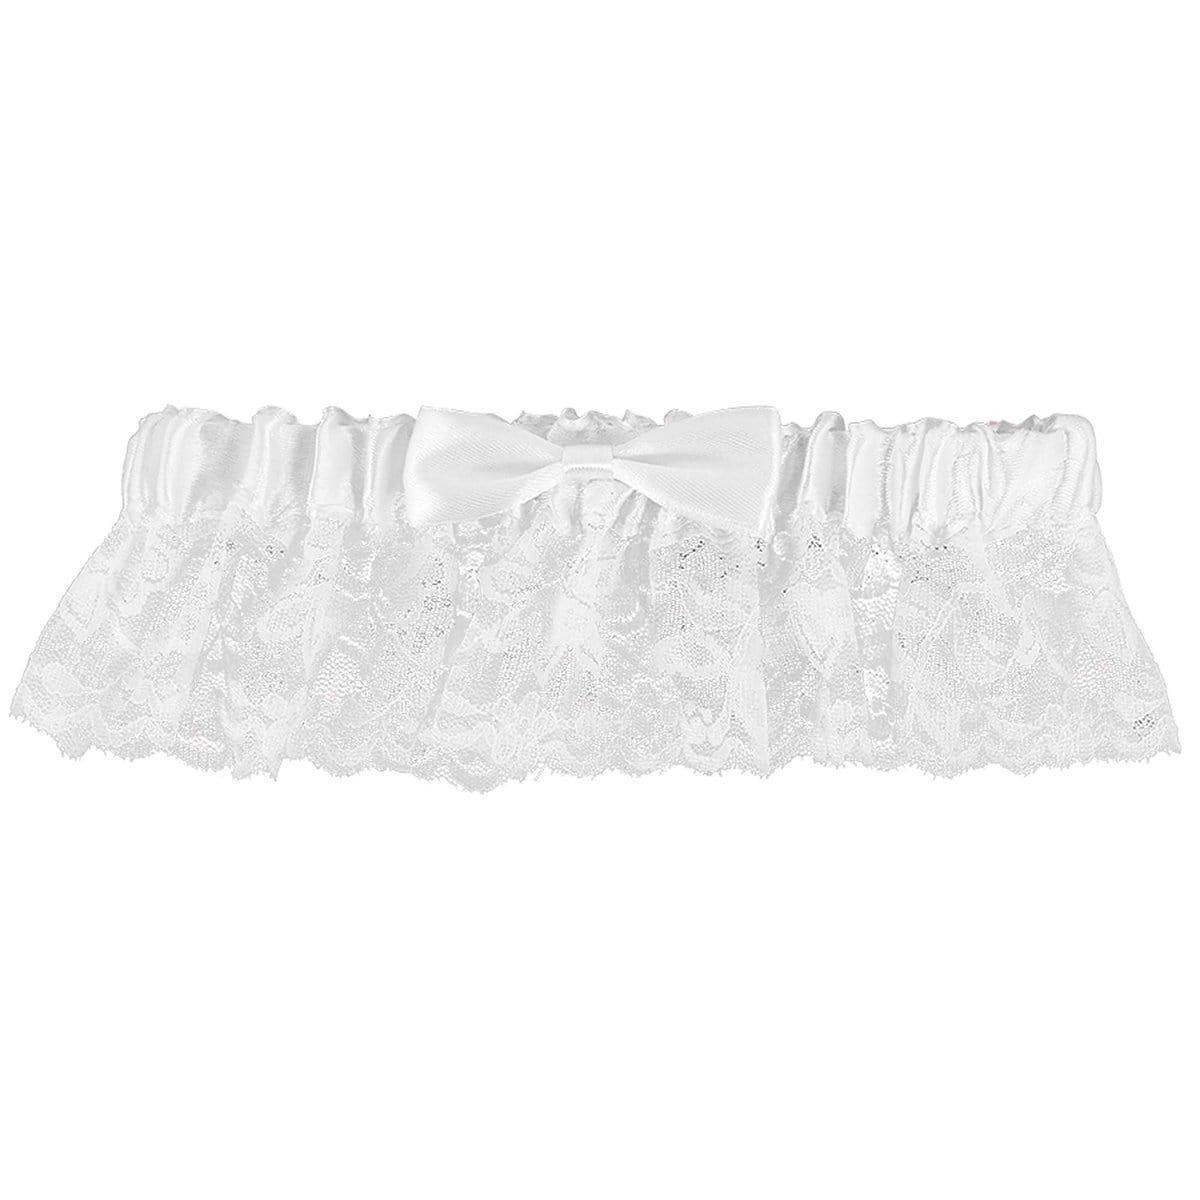 Buy Wedding White Garter sold at Party Expert